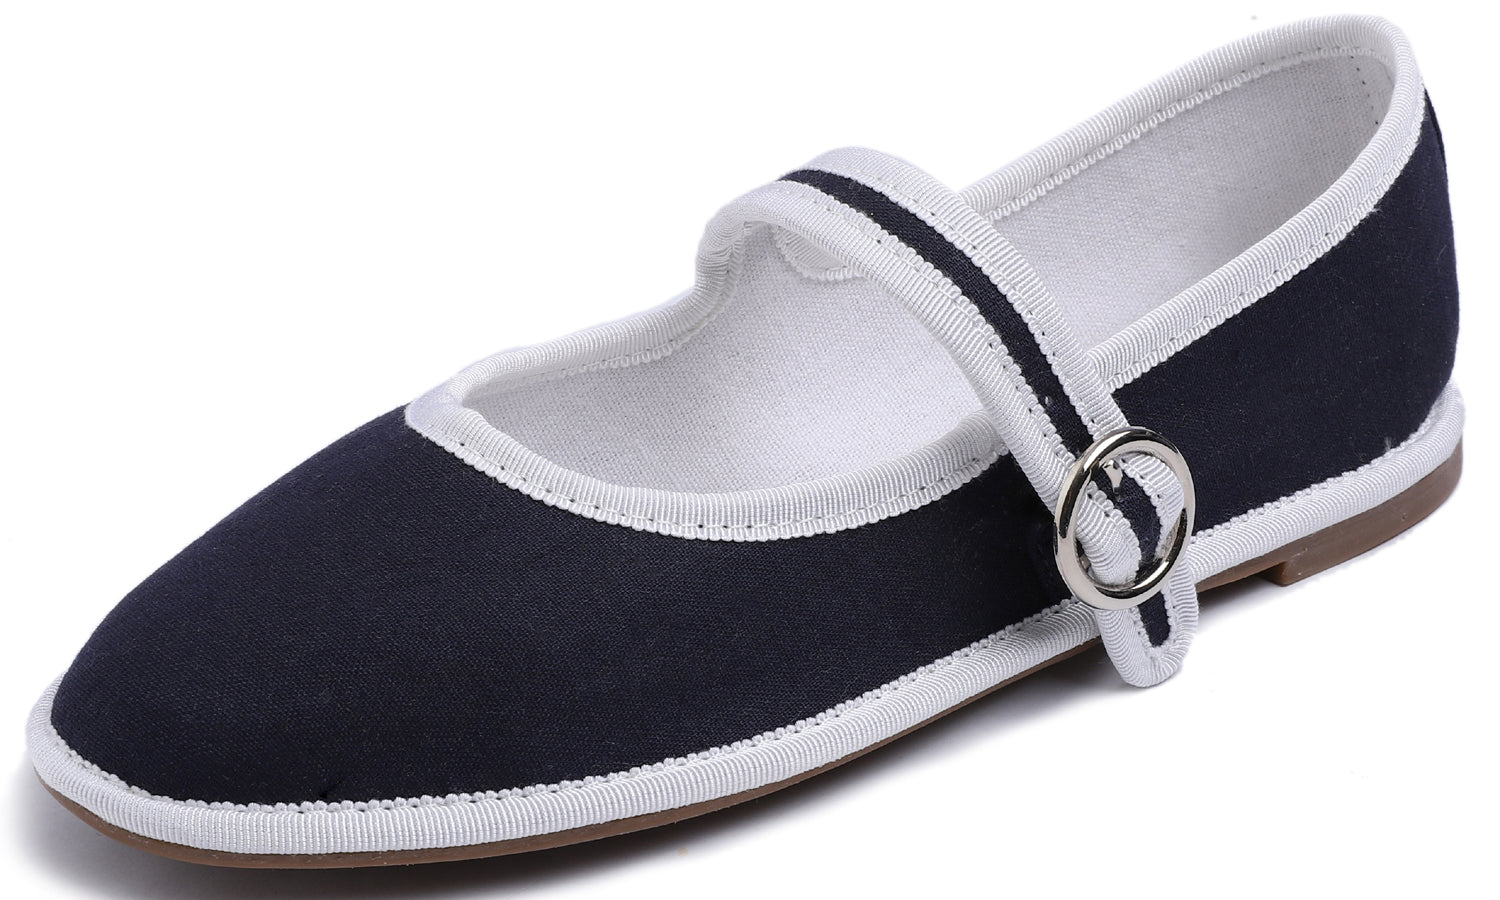 Feversole Women's Soft Breathable Mary Jane Memory Foam Cushioned Comfort Round Toe Metal Buckle Flats Walking Shoes Navy Blue Canvas